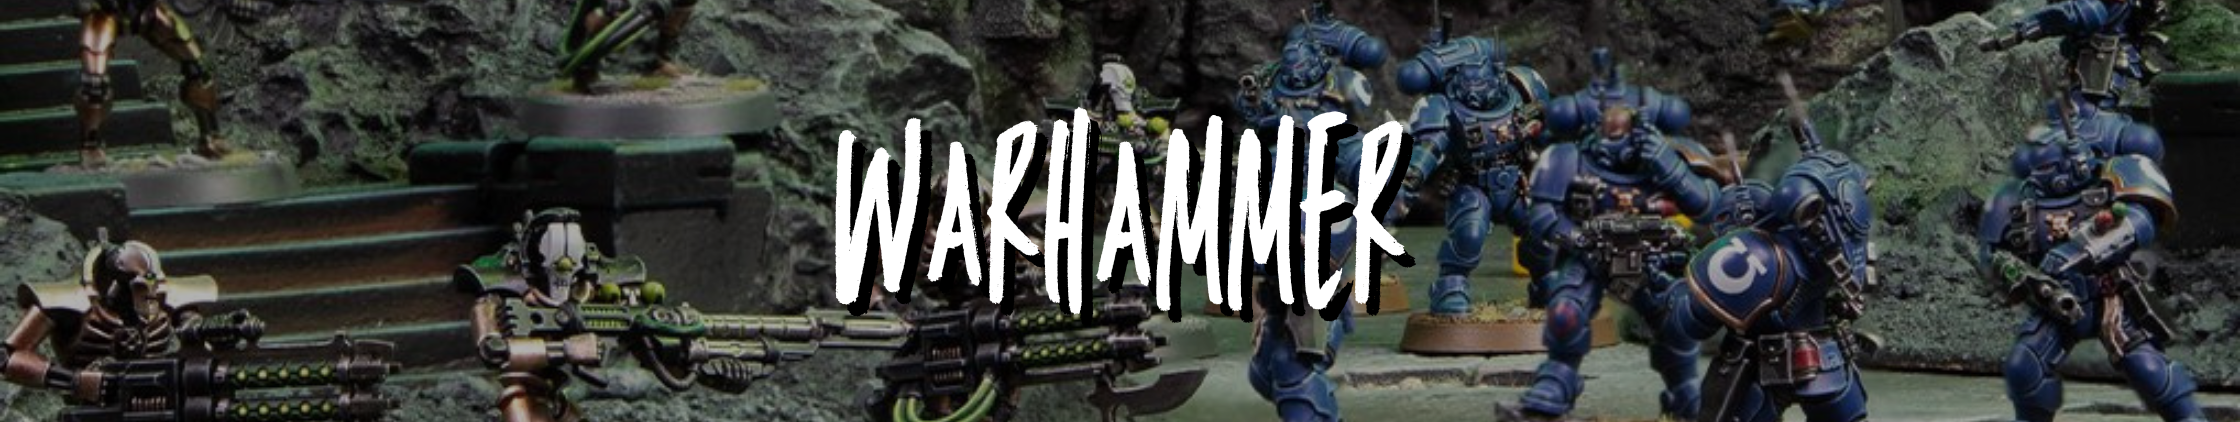 Warhammer Citadel Models and Miniatures for 40K and Age of Sigmar from BC Hobbies, A Canadian Hobby Shop and Online Retailer from Victoria BC 